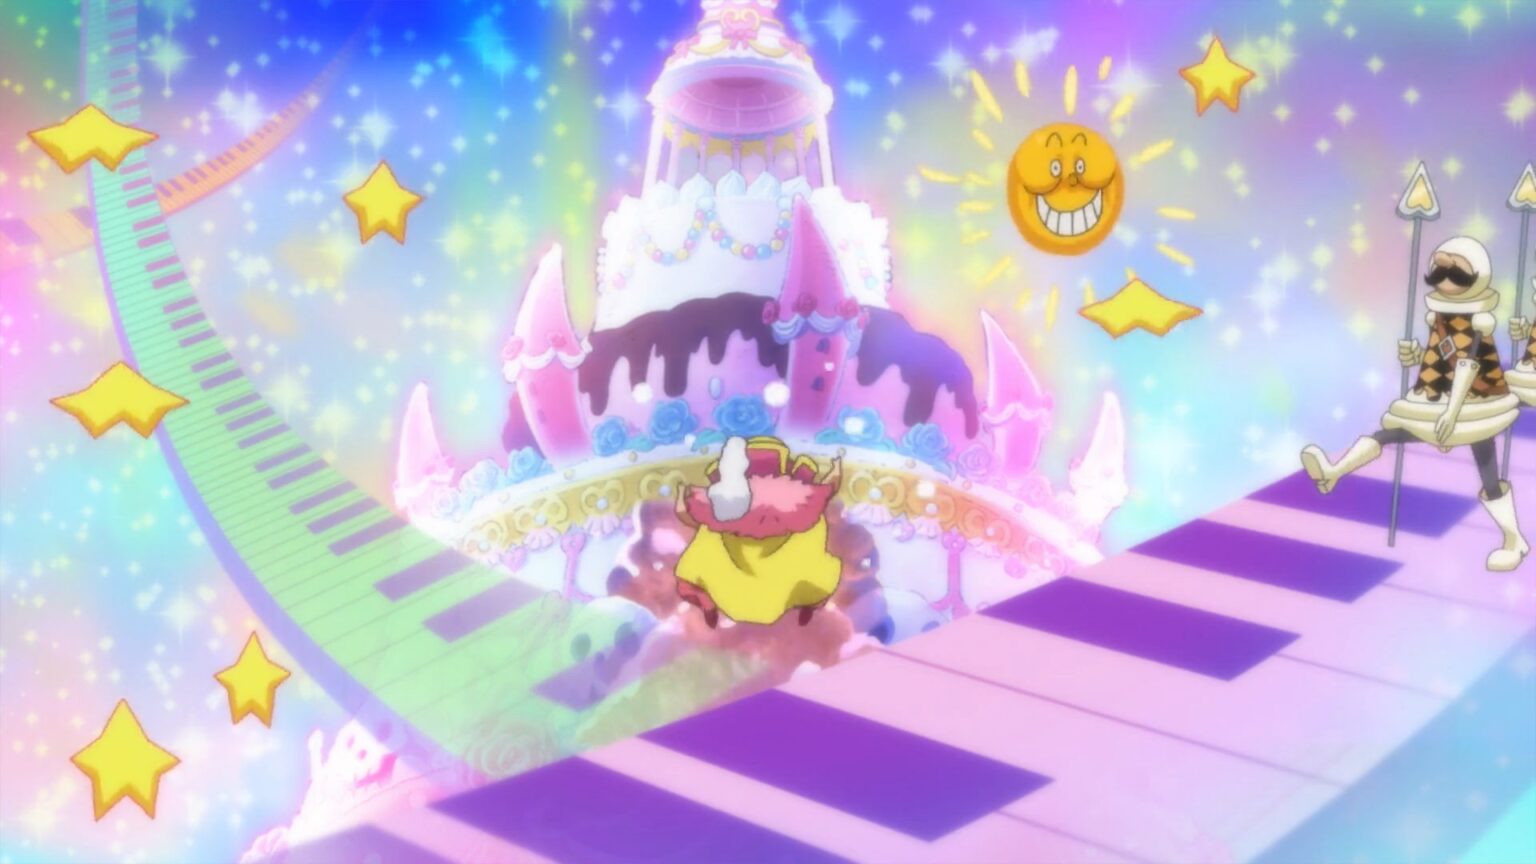 One Piece 872 Whole Cake Island is the Territory of Big Mom.